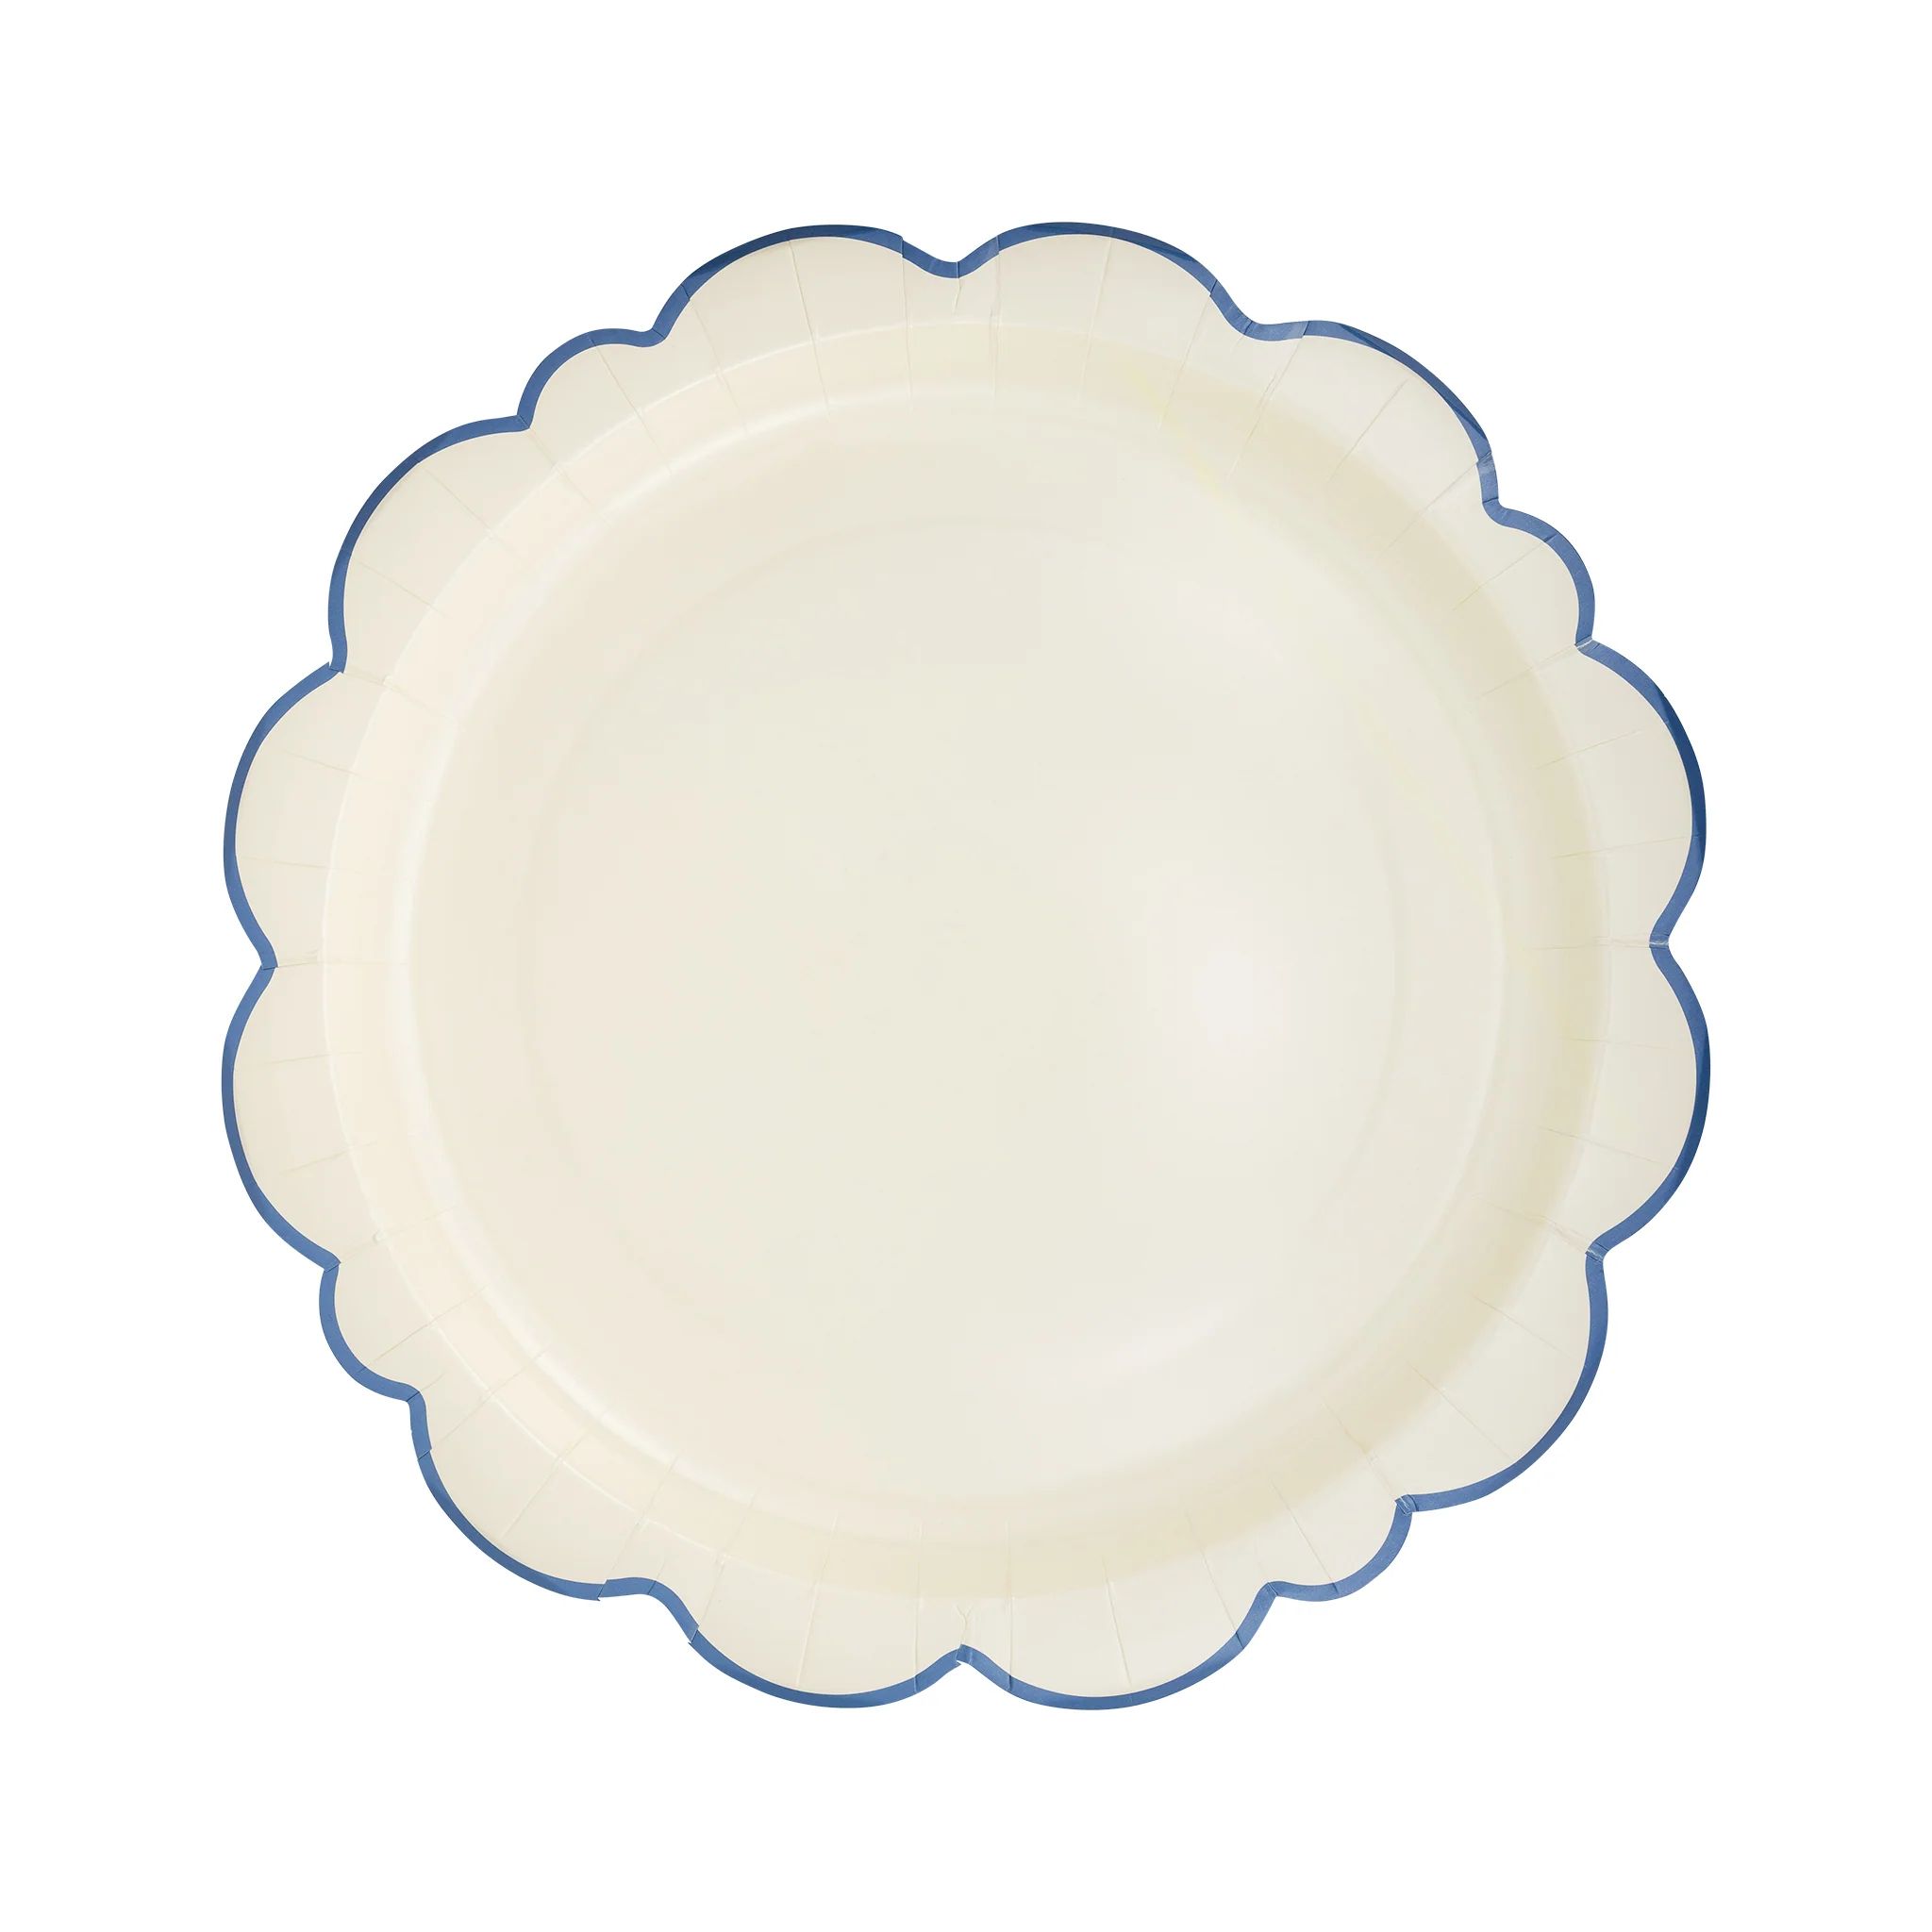 Pembroke Cream with Blue Edge 12" Paper Plate | My Mind's Eye